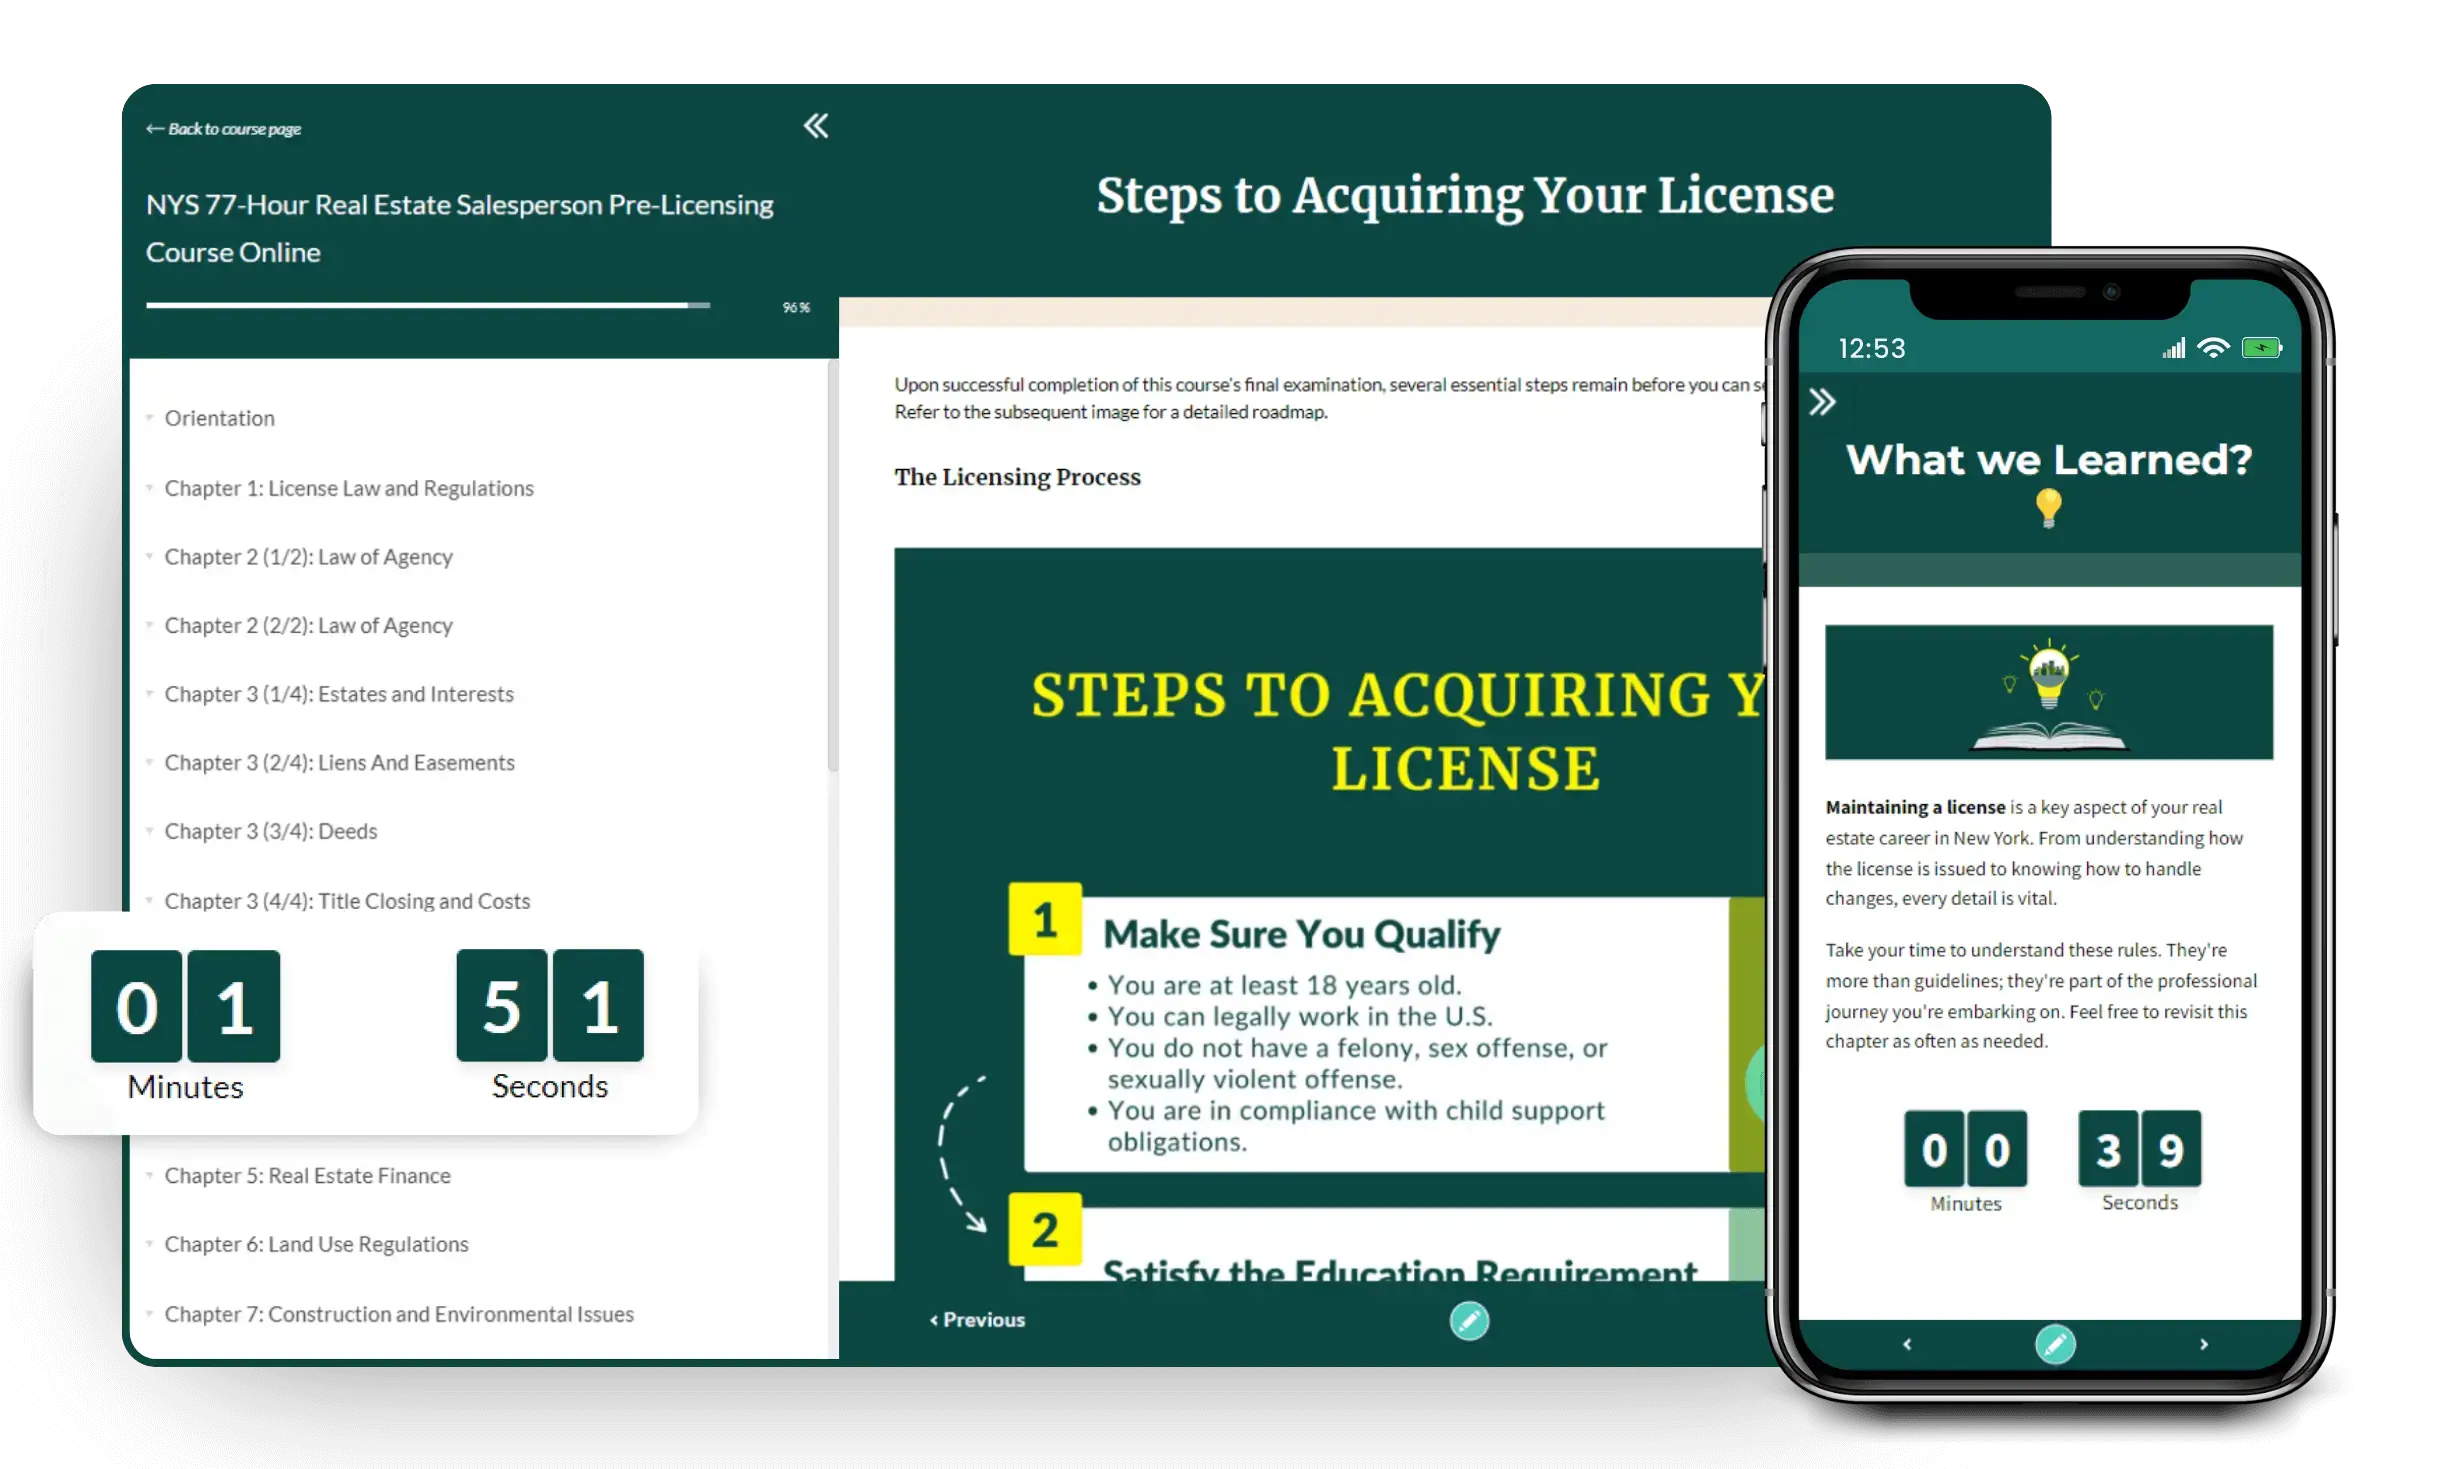 Interactive dashboard of the NYS 77-Hour Real Estate Salesperson Pre-Licensing Course Online and an introduction to the steps for acquiring a real estate license.